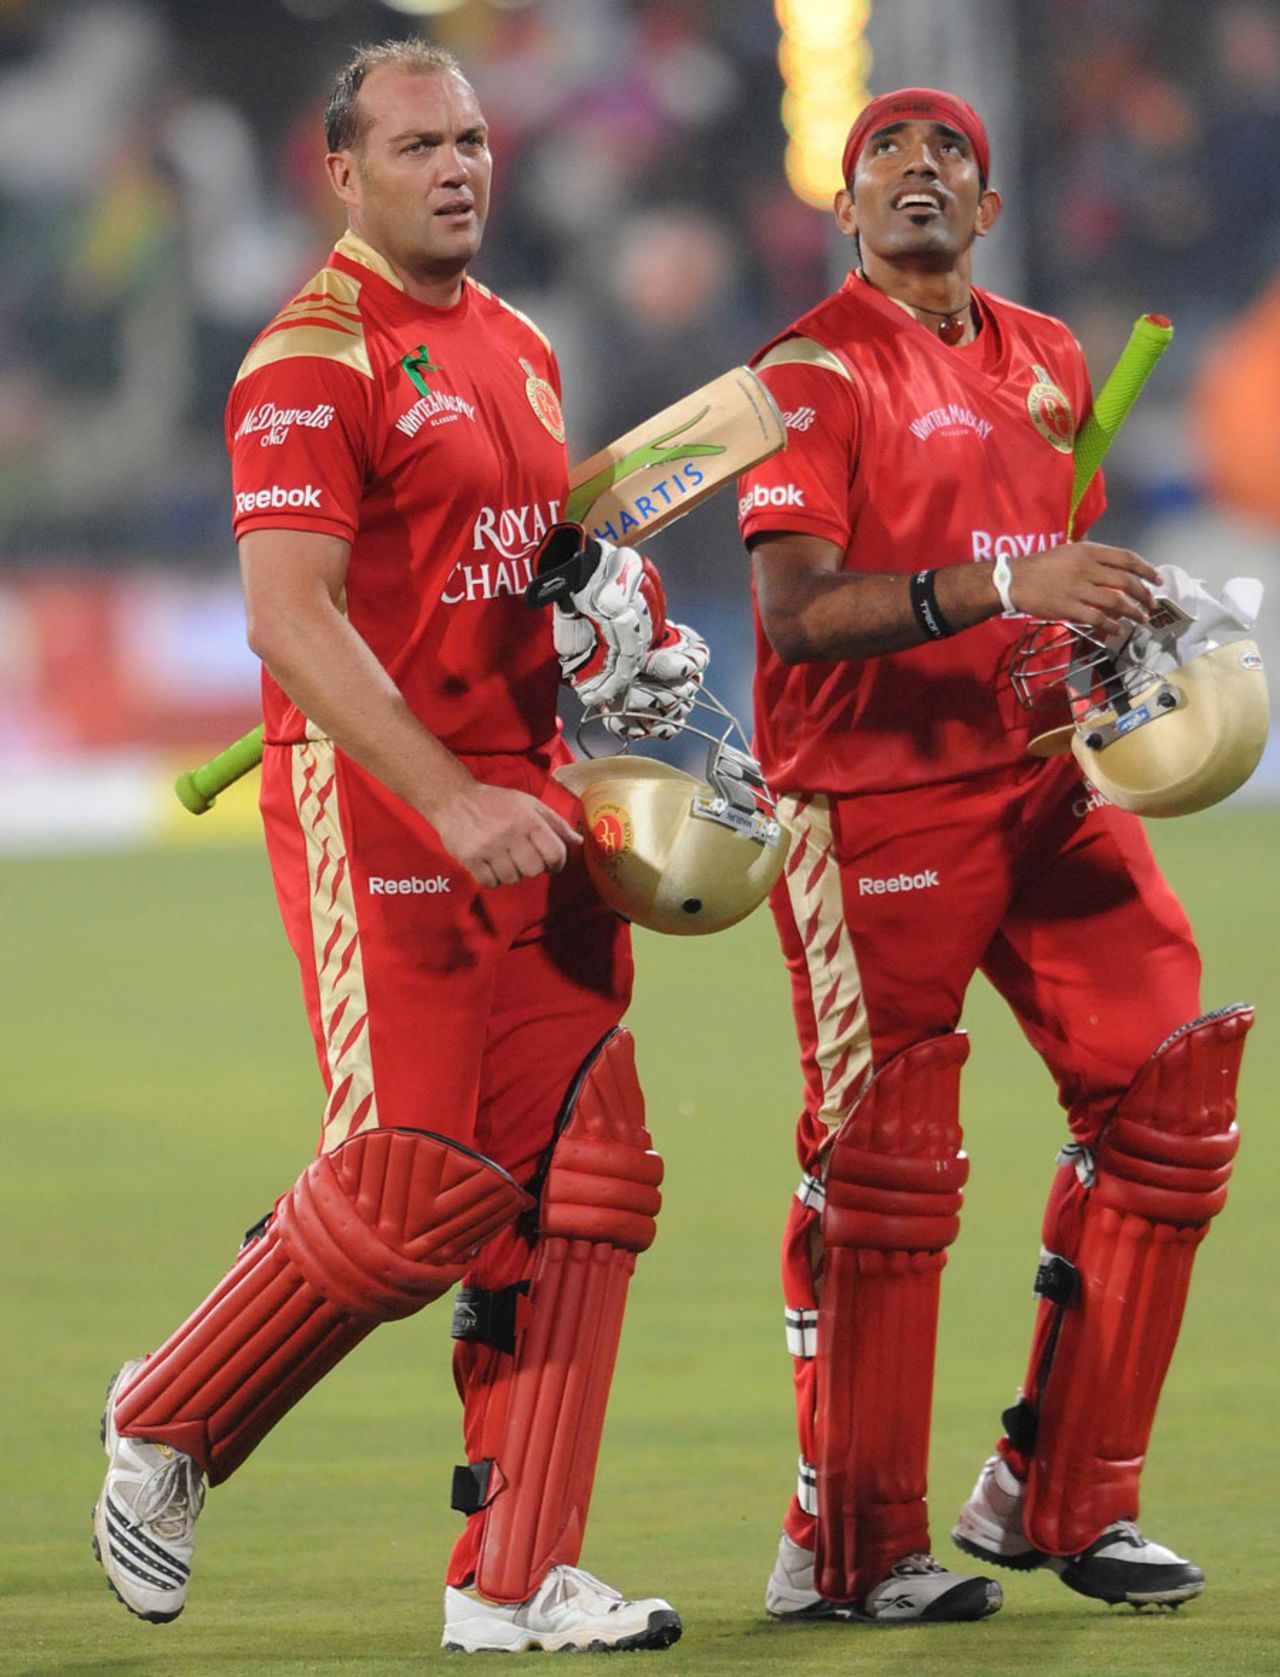 Jacques Kallis and Robin Uthappa walk of after completing the win, Royal Challengers Bangalore v Guyana, Champions League Twenty20, Centurion, September 12, 2010